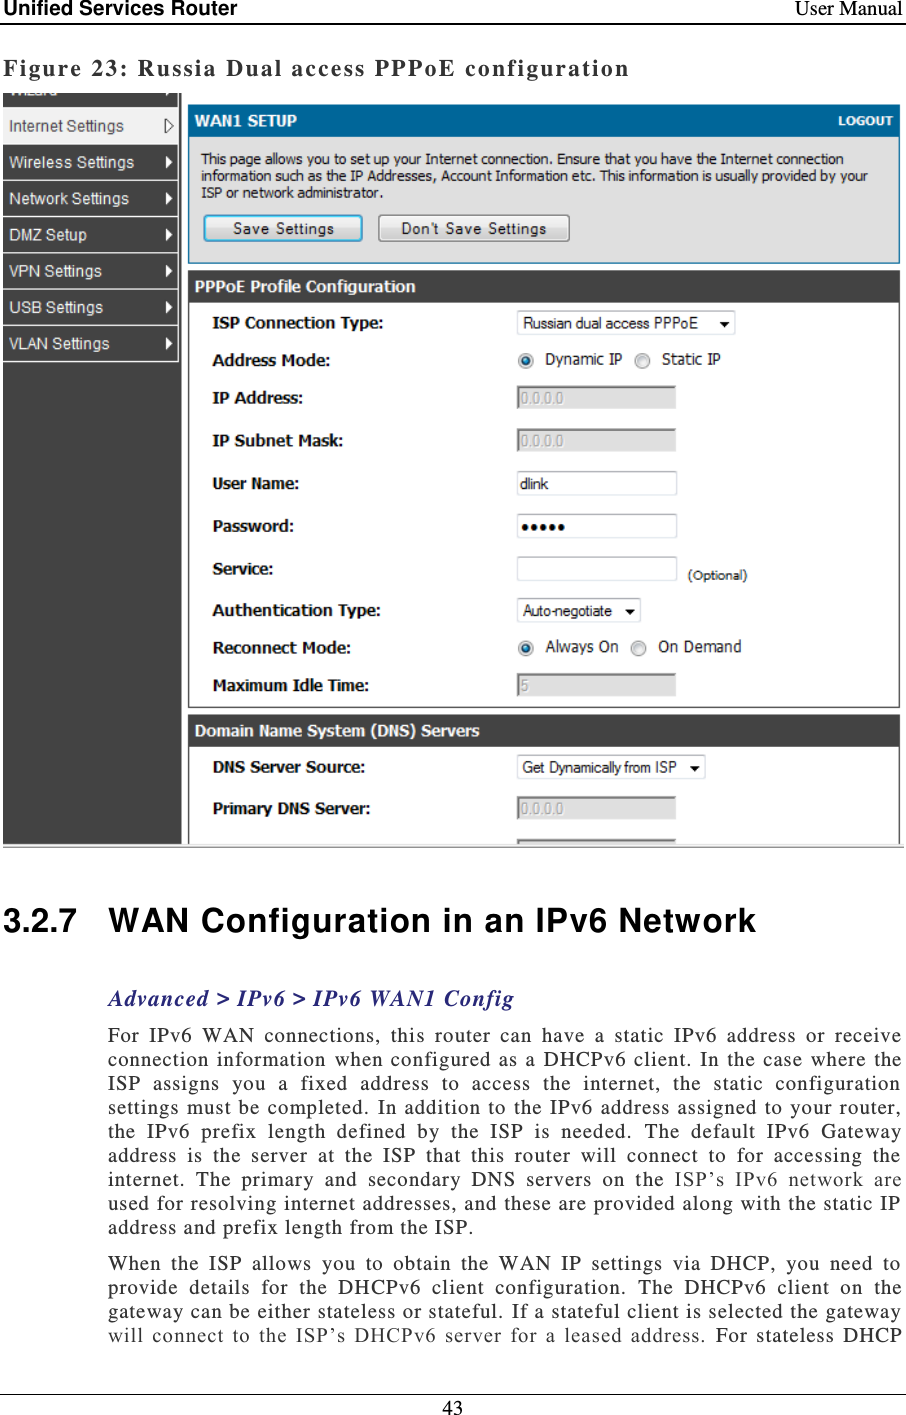 Unified Services Router    User Manual 43  Figure 23: Russia  Dual access PPPoE configuration   3.2.7  WAN Configuration in an IPv6 Network Advanced &gt; IPv6 &gt; IPv6 WAN1 Config For  IPv6  WAN  connections,  this  router  can  have  a  static  IPv6  address  or  receive connection  information  when  configured  as  a DHCPv6  client.  In  the case  where the ISP  assigns  you  a  fixed  address  to  access  the  internet,  the  static  configuration settings  must  be completed.  In  addition to  the  IPv6 address assigned to  your  router, the  IPv6  prefix  length  defined  by  the  ISP  is  needed.   The  default  IPv6  Gateway address  is  the  server  at  the  ISP  that  this  router  will  connect  to  for  accessing  the internet.  The  primary  and  secondary  DNS  servers  on  the ISP’s  IPv6  network  are used for resolving internet addresses, and these are provided along with the static IP address and prefix length from the ISP.  When  the  ISP  allows  you  to  obtain  the  WAN  IP  settings  via  DHCP,  you  need  to provide  details  for  the  DHCPv6  client  configuration.  The  DHCPv6  client  on  the gateway can be either stateless or stateful.  If a stateful client is selected the gateway will  connect  to  the  ISP’s  DHCPv6  server  for  a  leased  address.  For  stateless  DHCP 